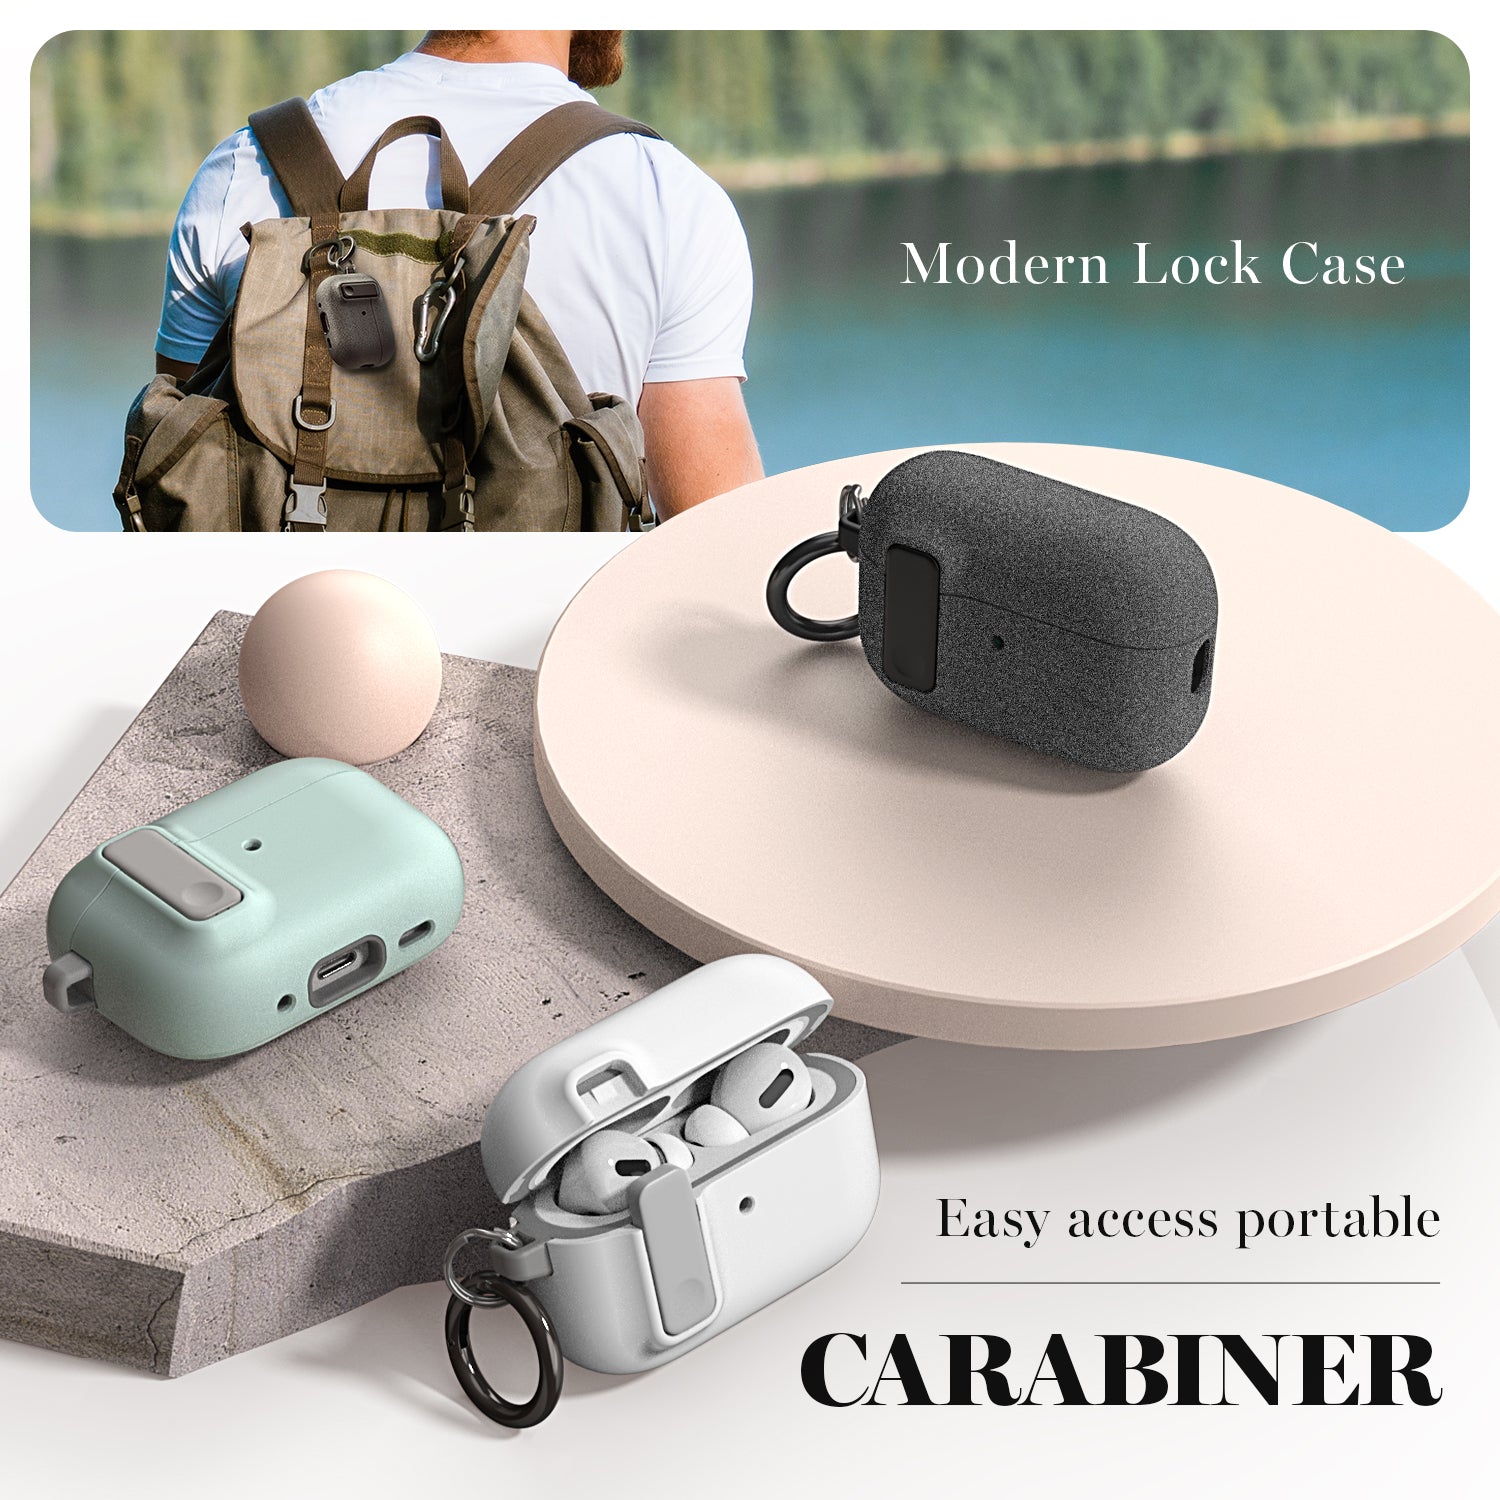 In ear Apple AirPods Pro Premium wireless earbuds Case with Carabiner – VRS  Design